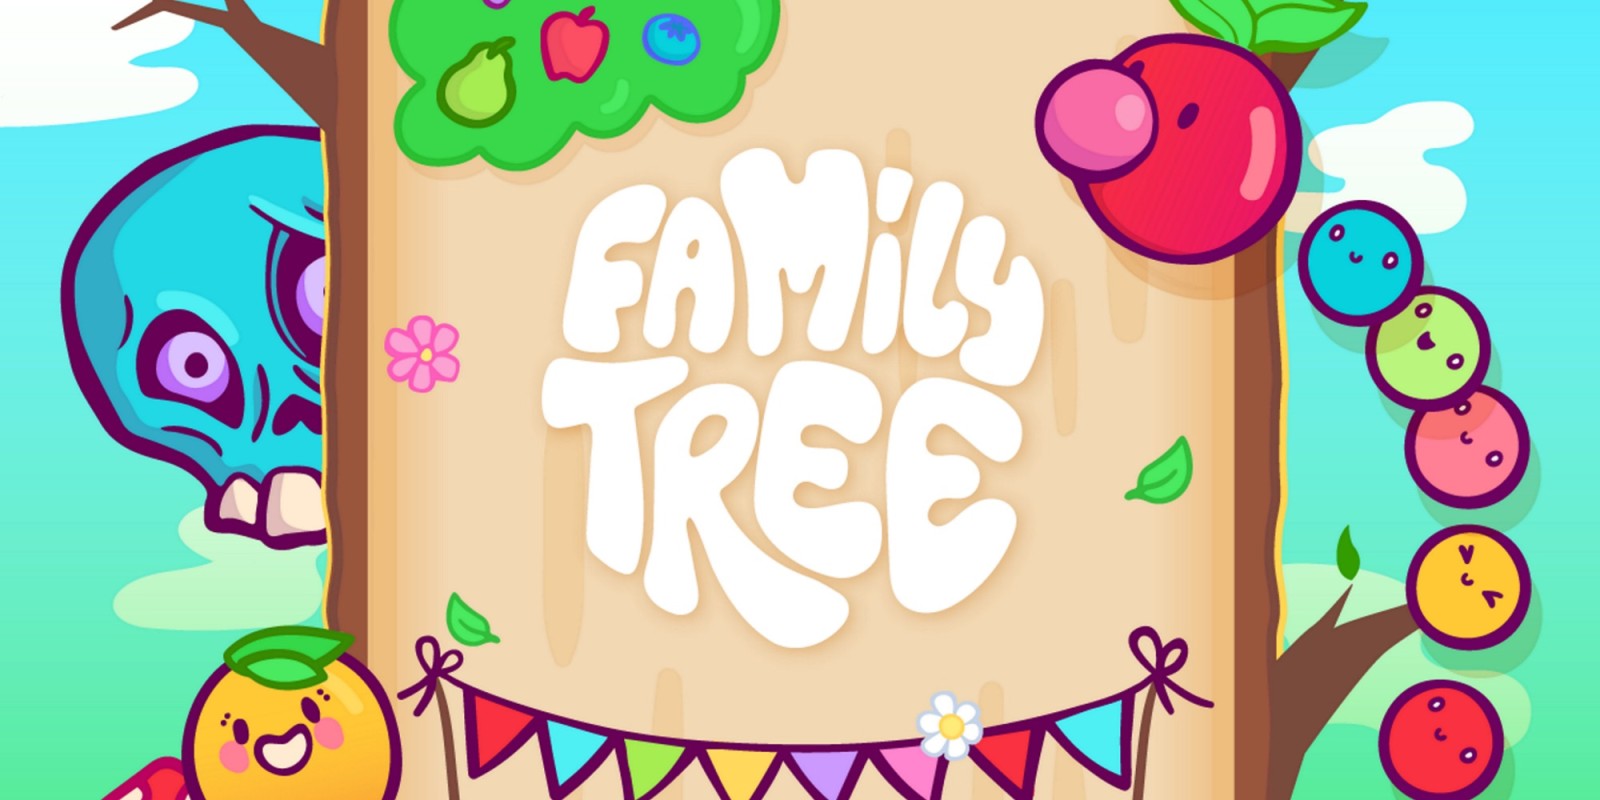 free download the first tree nintendo switch review